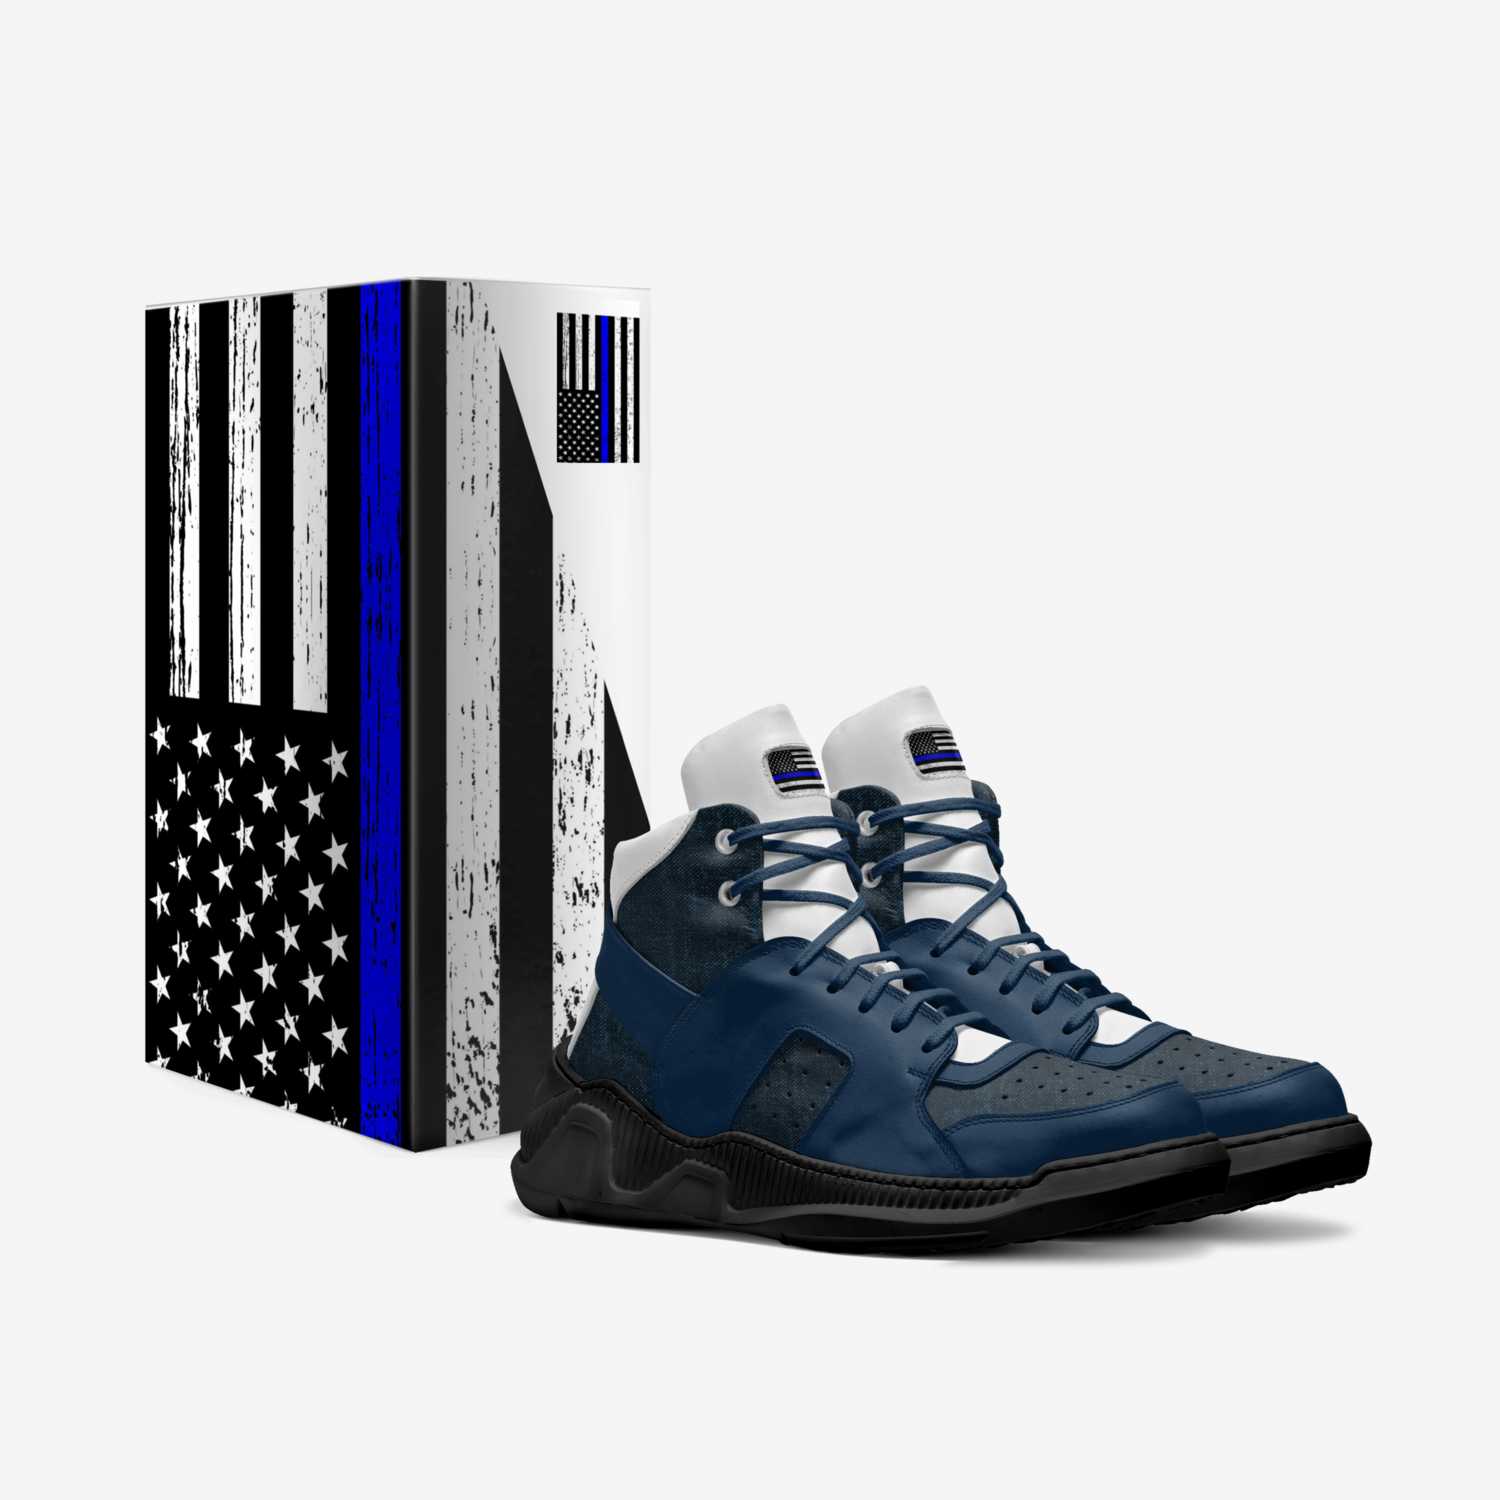 Thin Blue Line custom made in Italy shoes by Vth Global | Box view